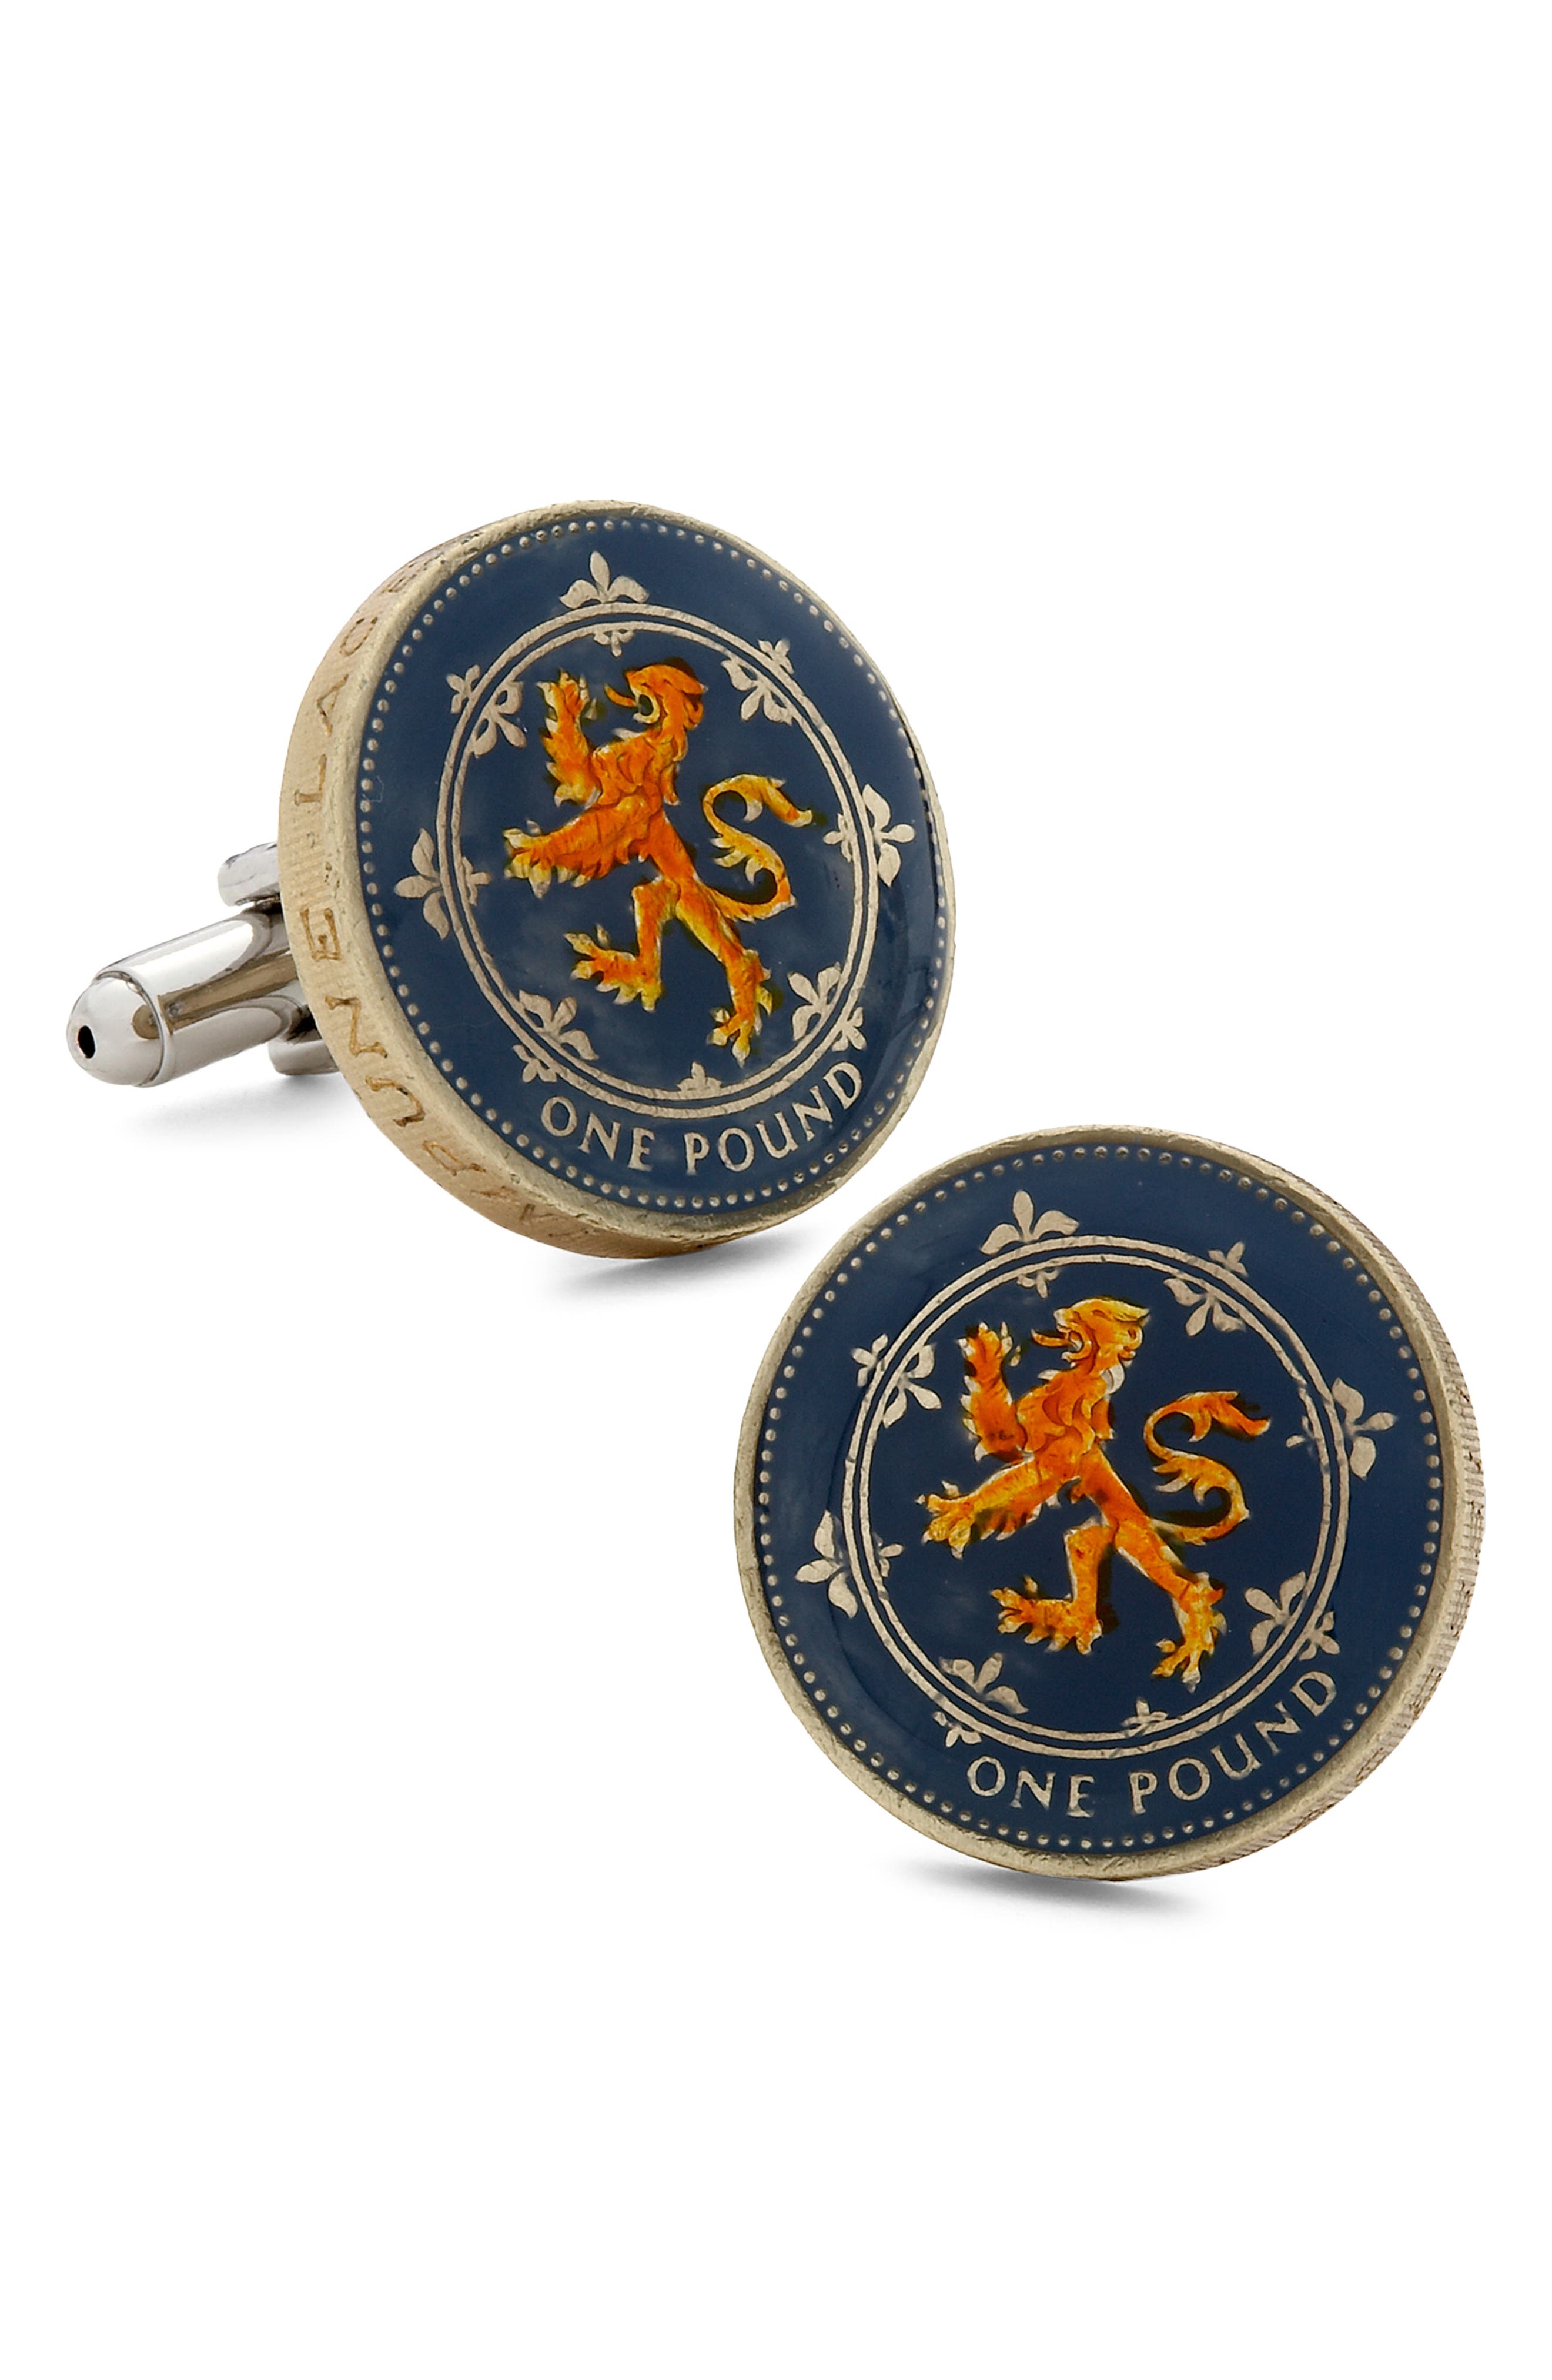 Lion on Crown of Scotland Arms UK Scottish Crest Shilling KGVI Coin Cufflinks 